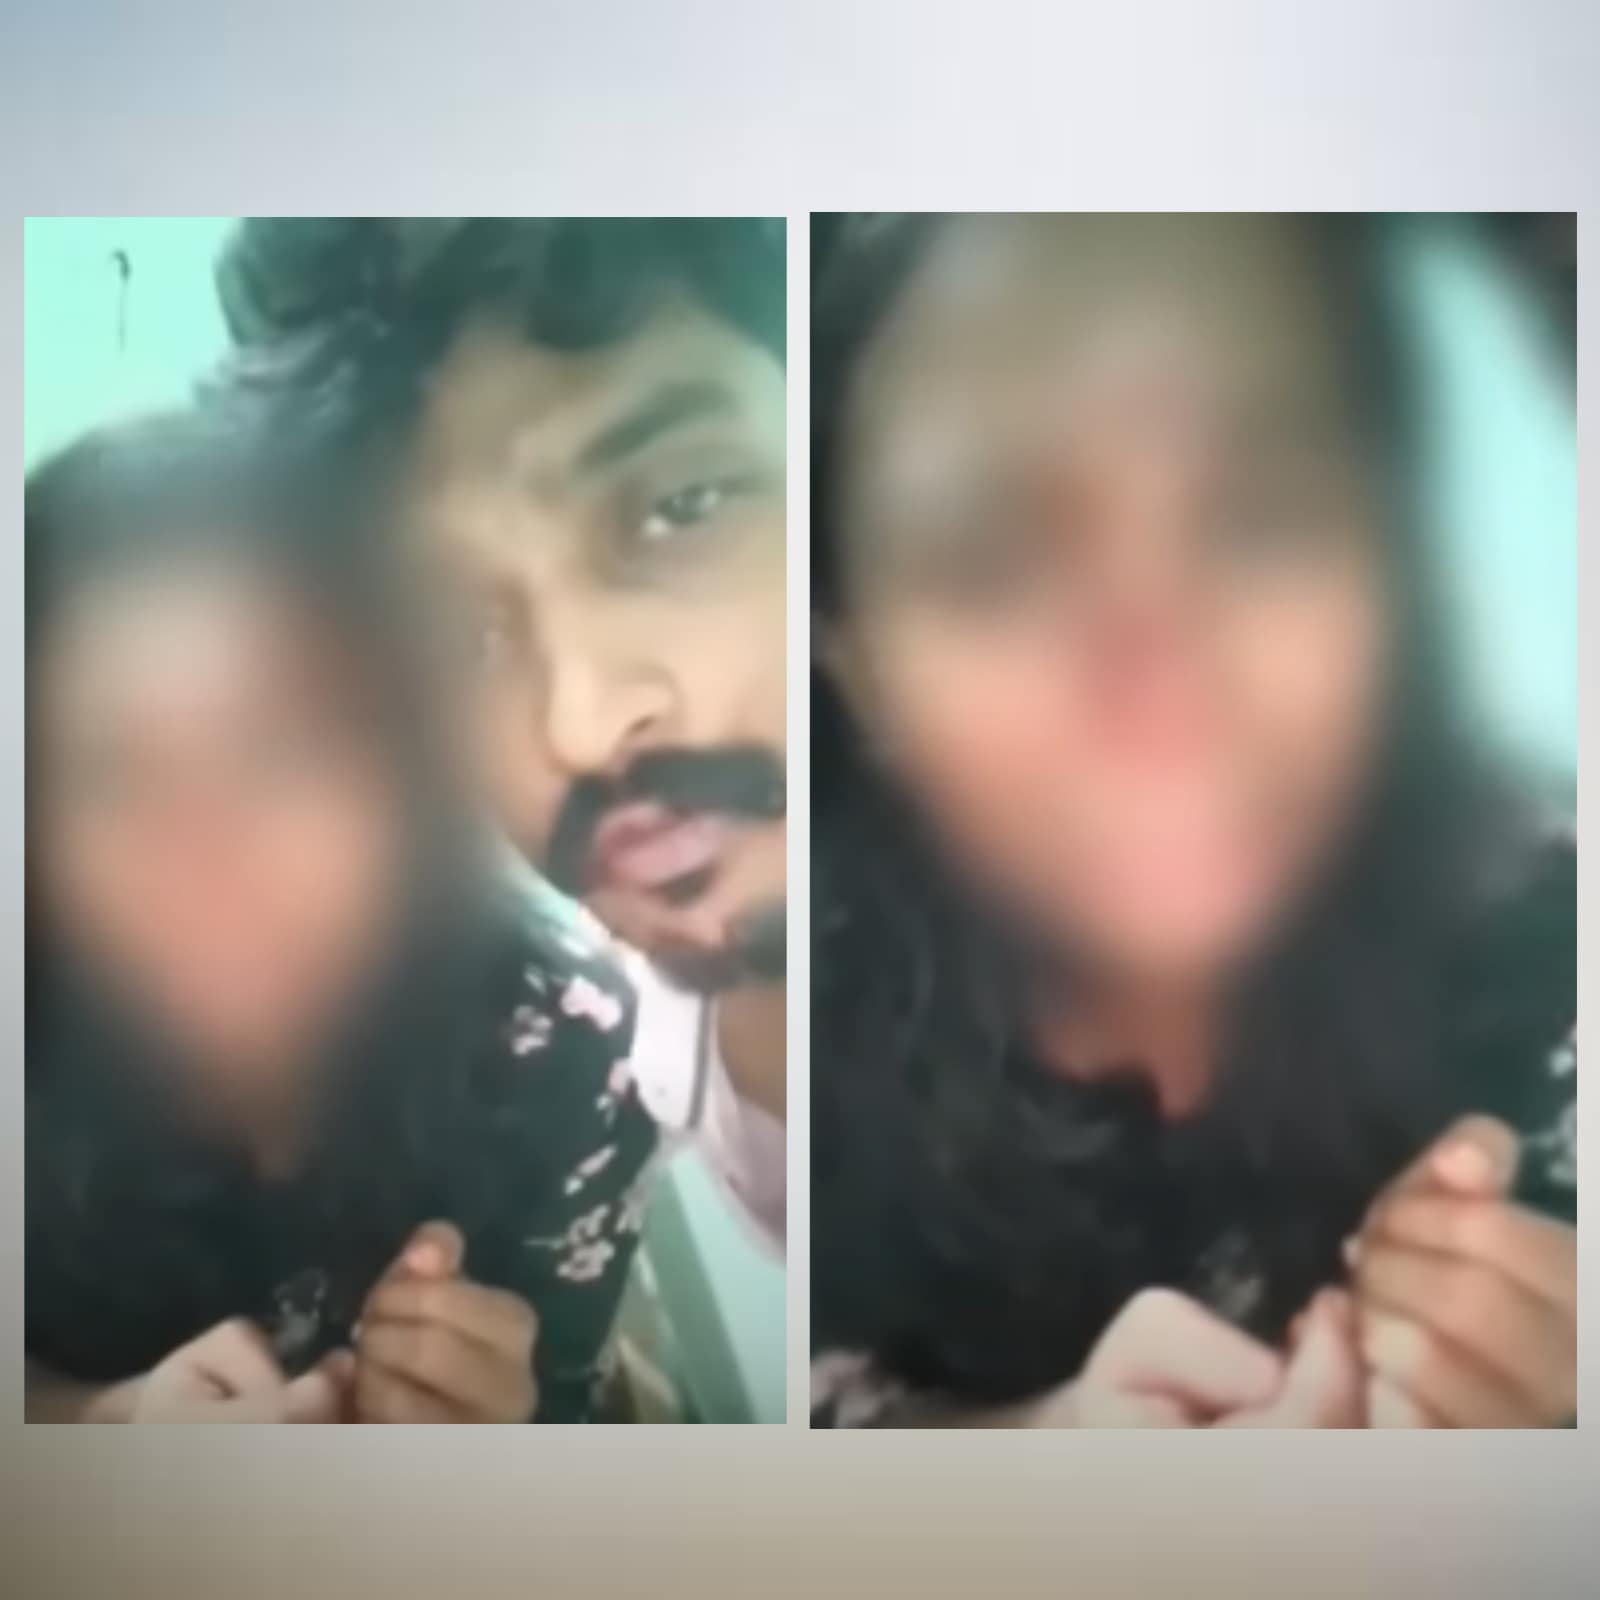 Kerala Man Thrashes Wife, Films Assault, Shares Video With Friends pic photo image